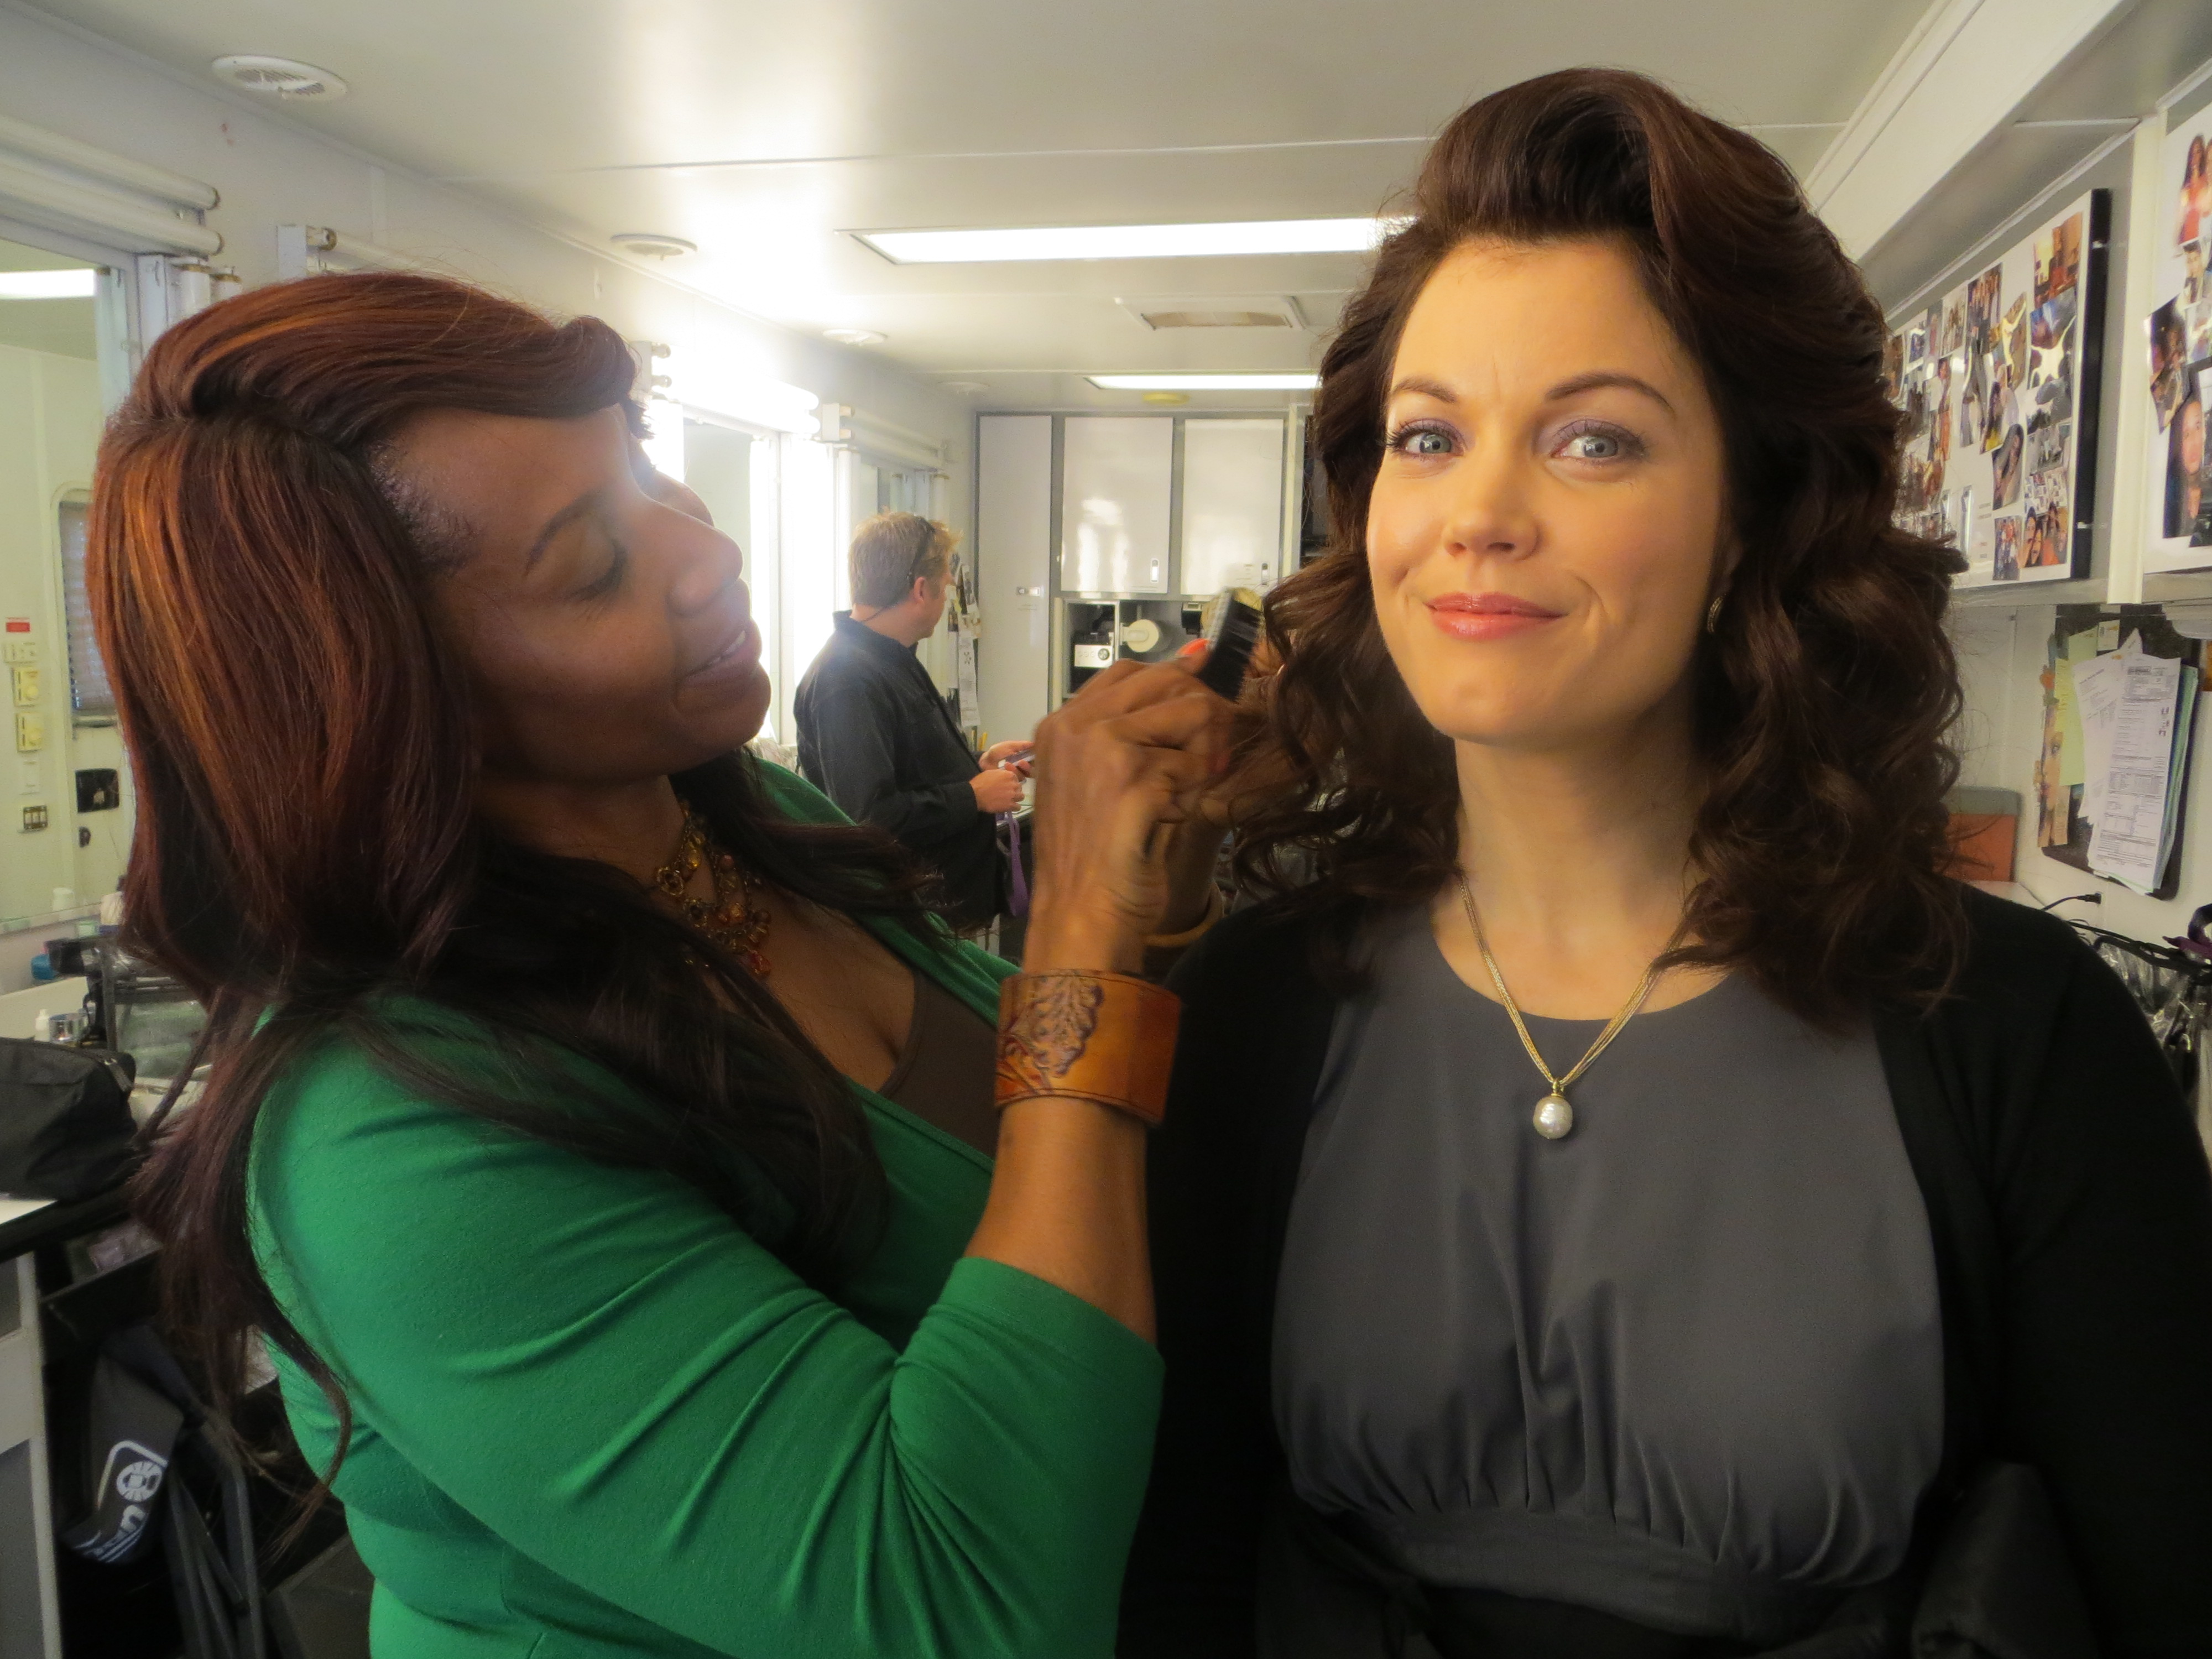 Big Hair is one of my favorite looks to create. Bellamy Young playing Mellie Grant on Scandal